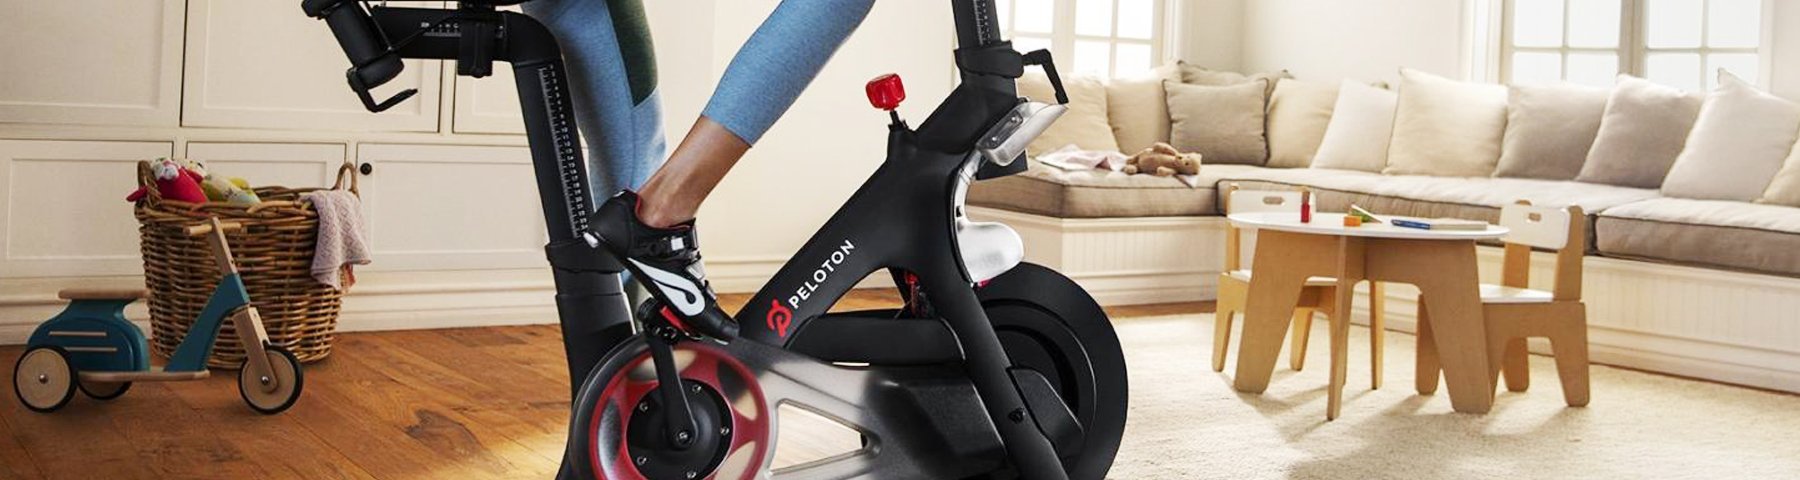 Why You Need Dedicated Pedals for Indoor Fitness Bikes